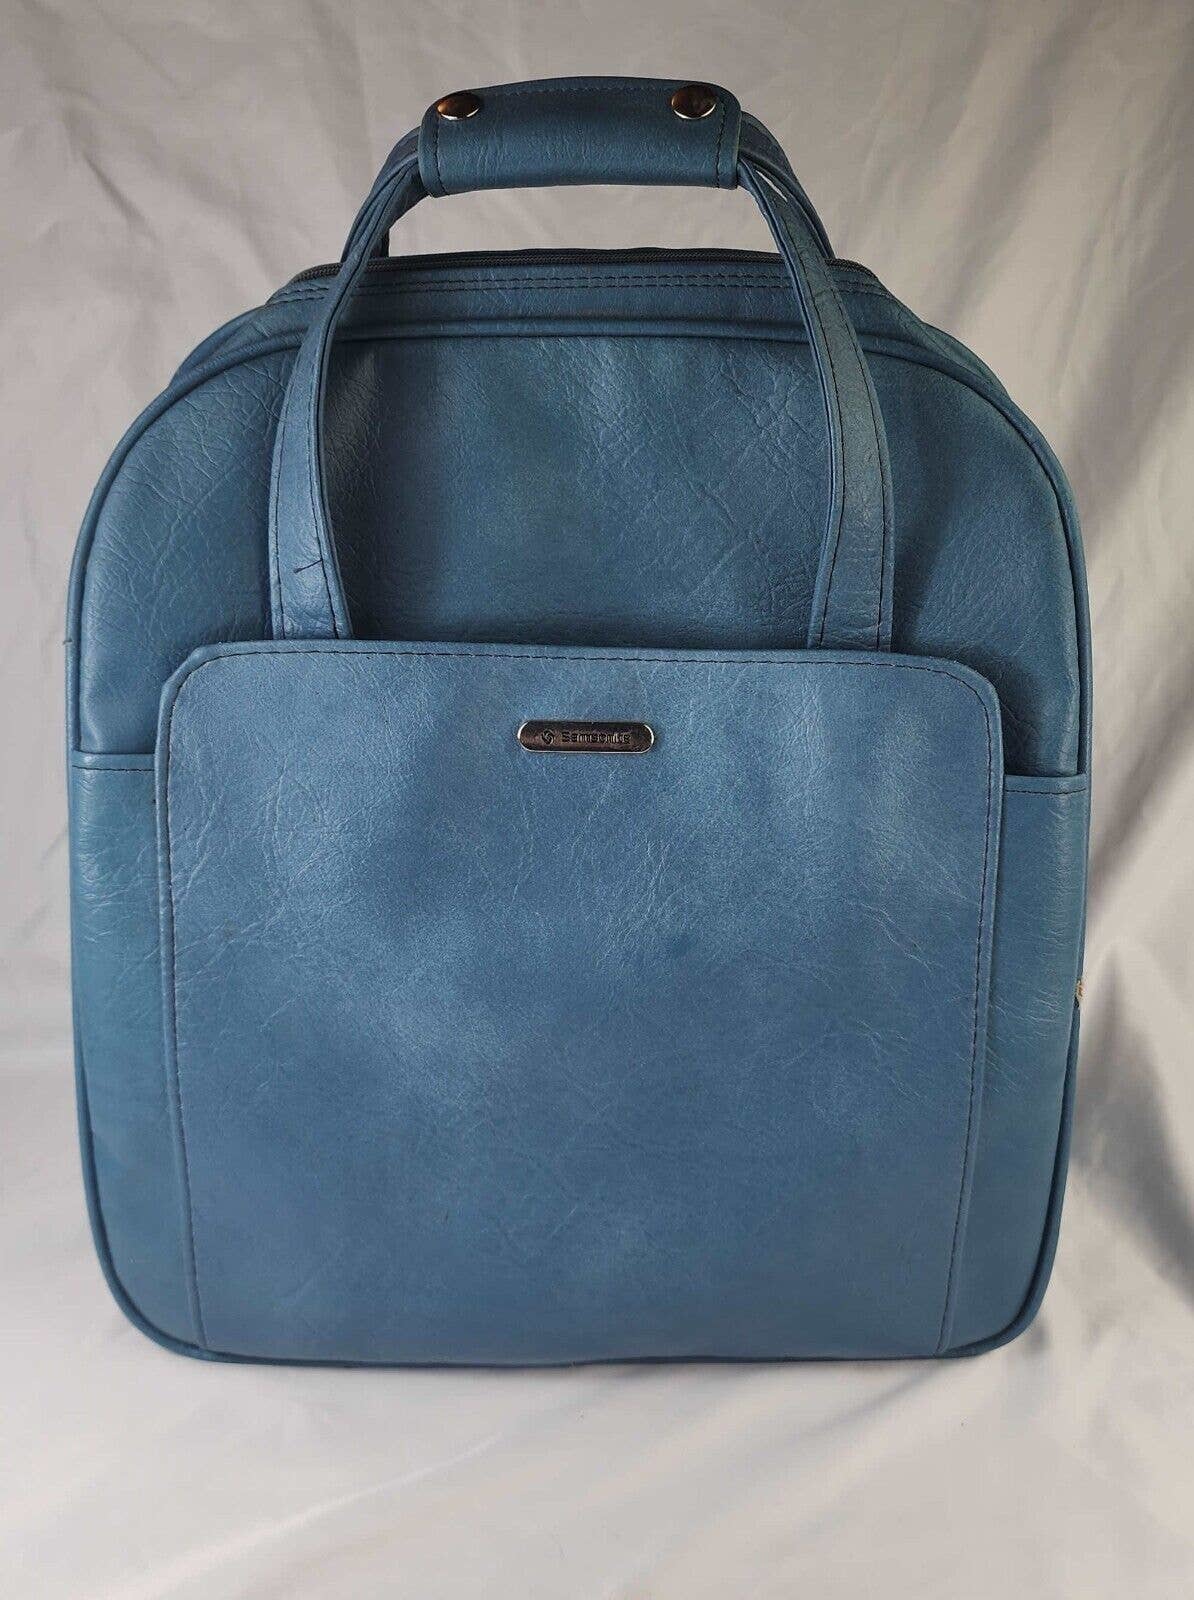 Primary image for Samsonite Silhouette II Vintage 80s Blue Tall Carry-On Bag Luggage Good Cond